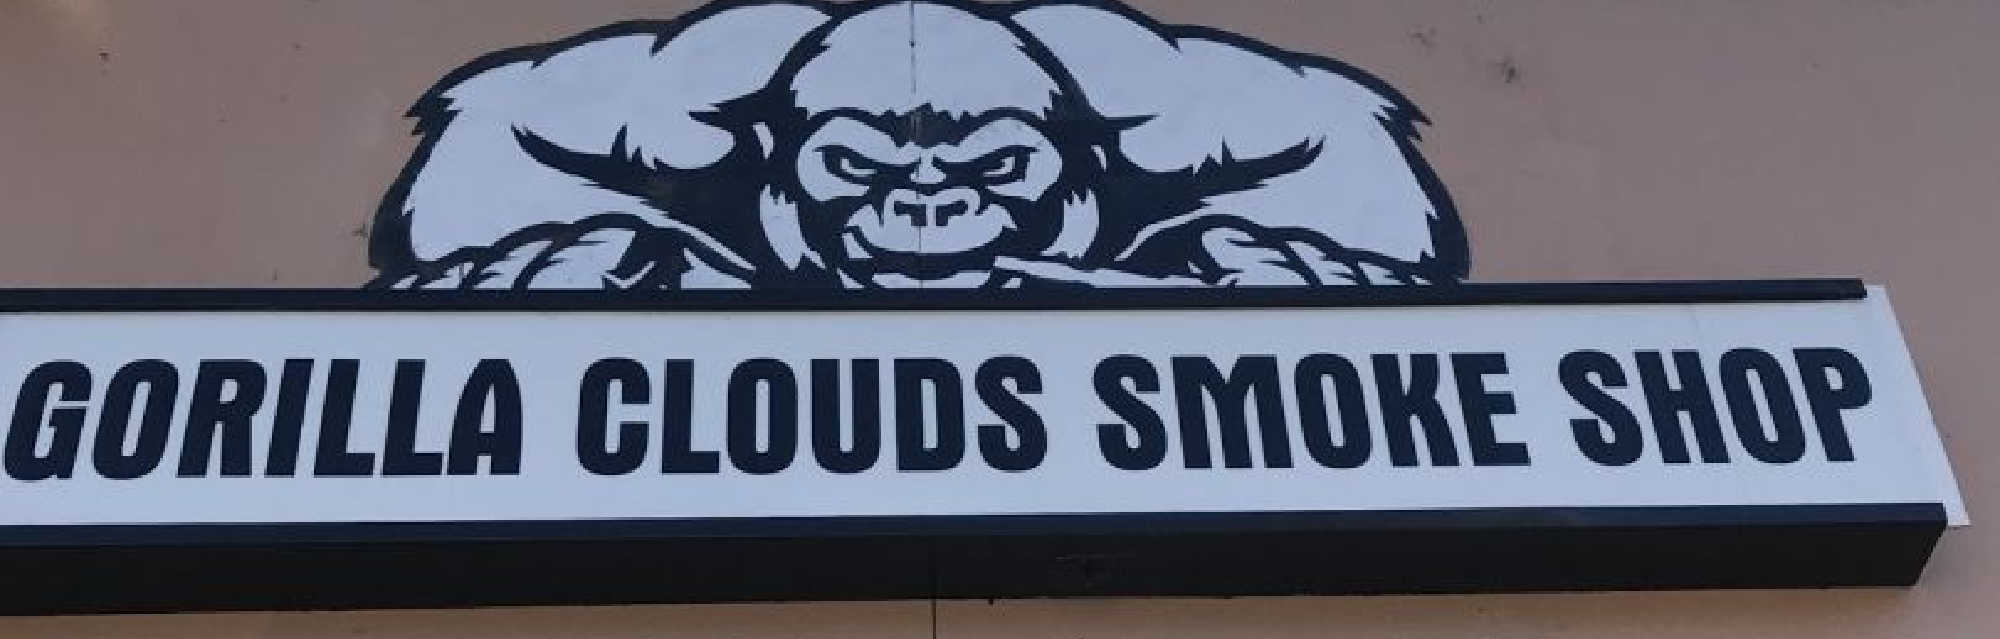 image of gorilla clouds smoke shop in union city